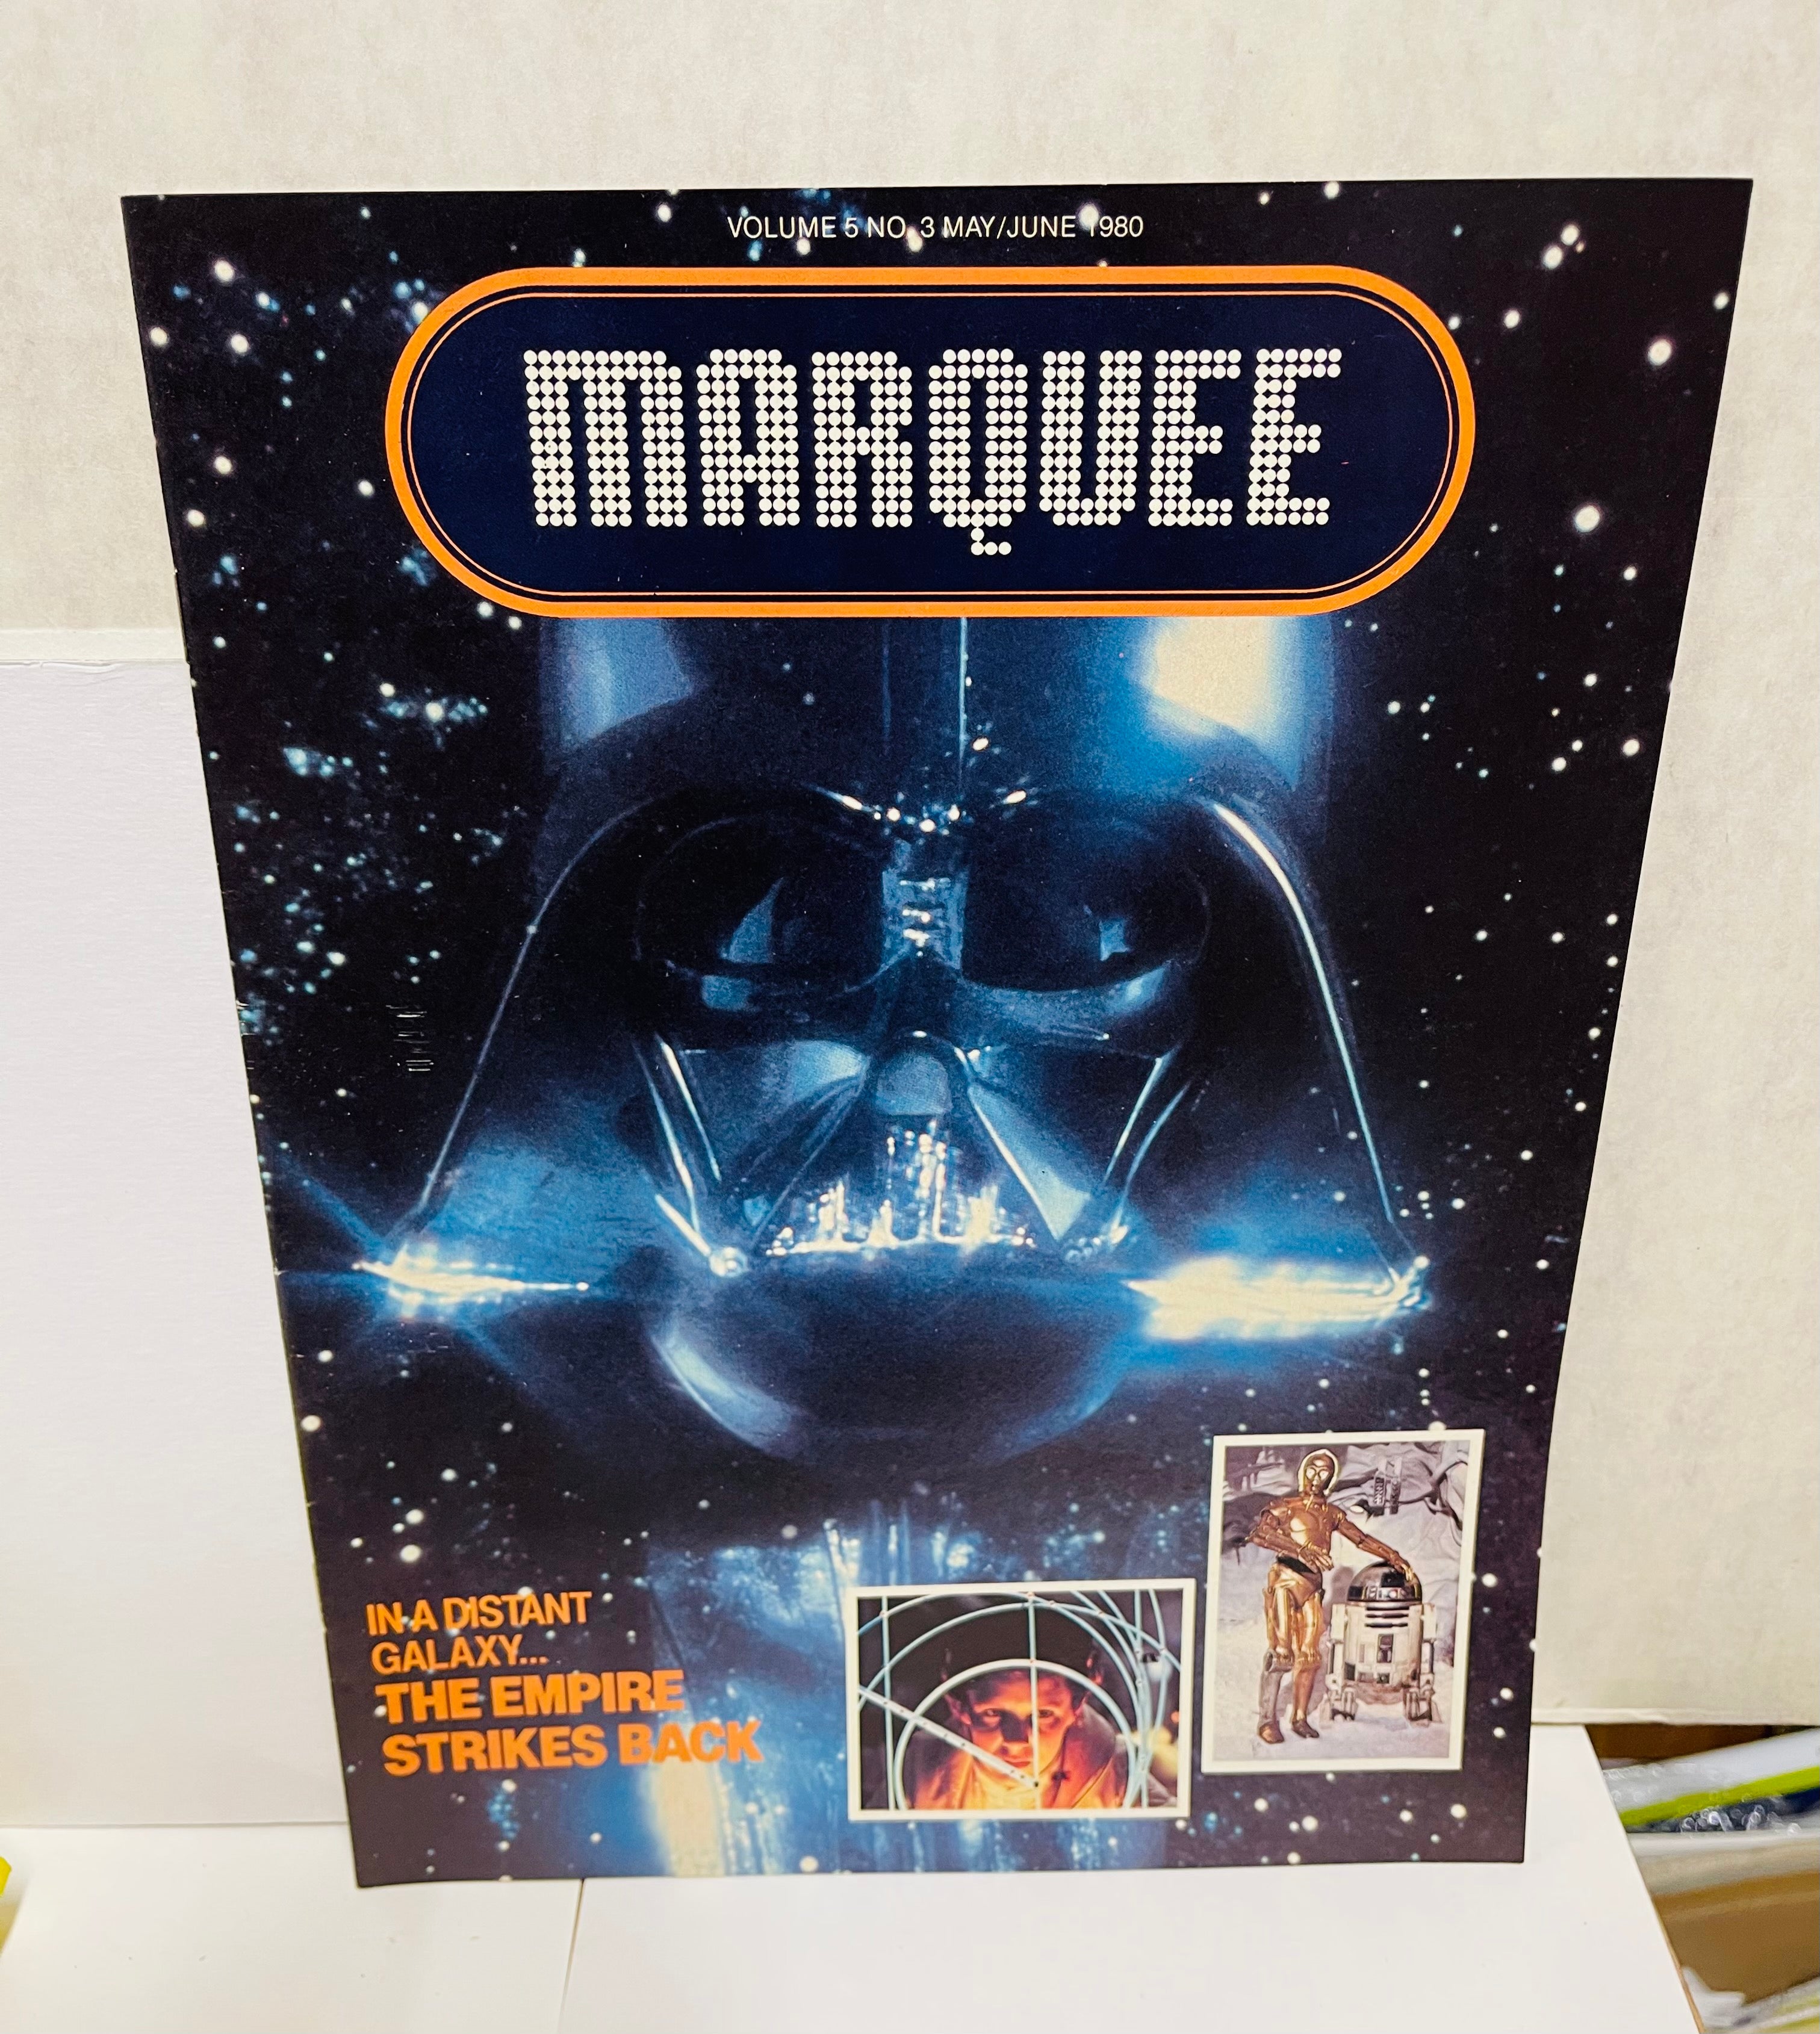 Empire Strikes Back Marquee movie magazine first appearance for this movie 1980